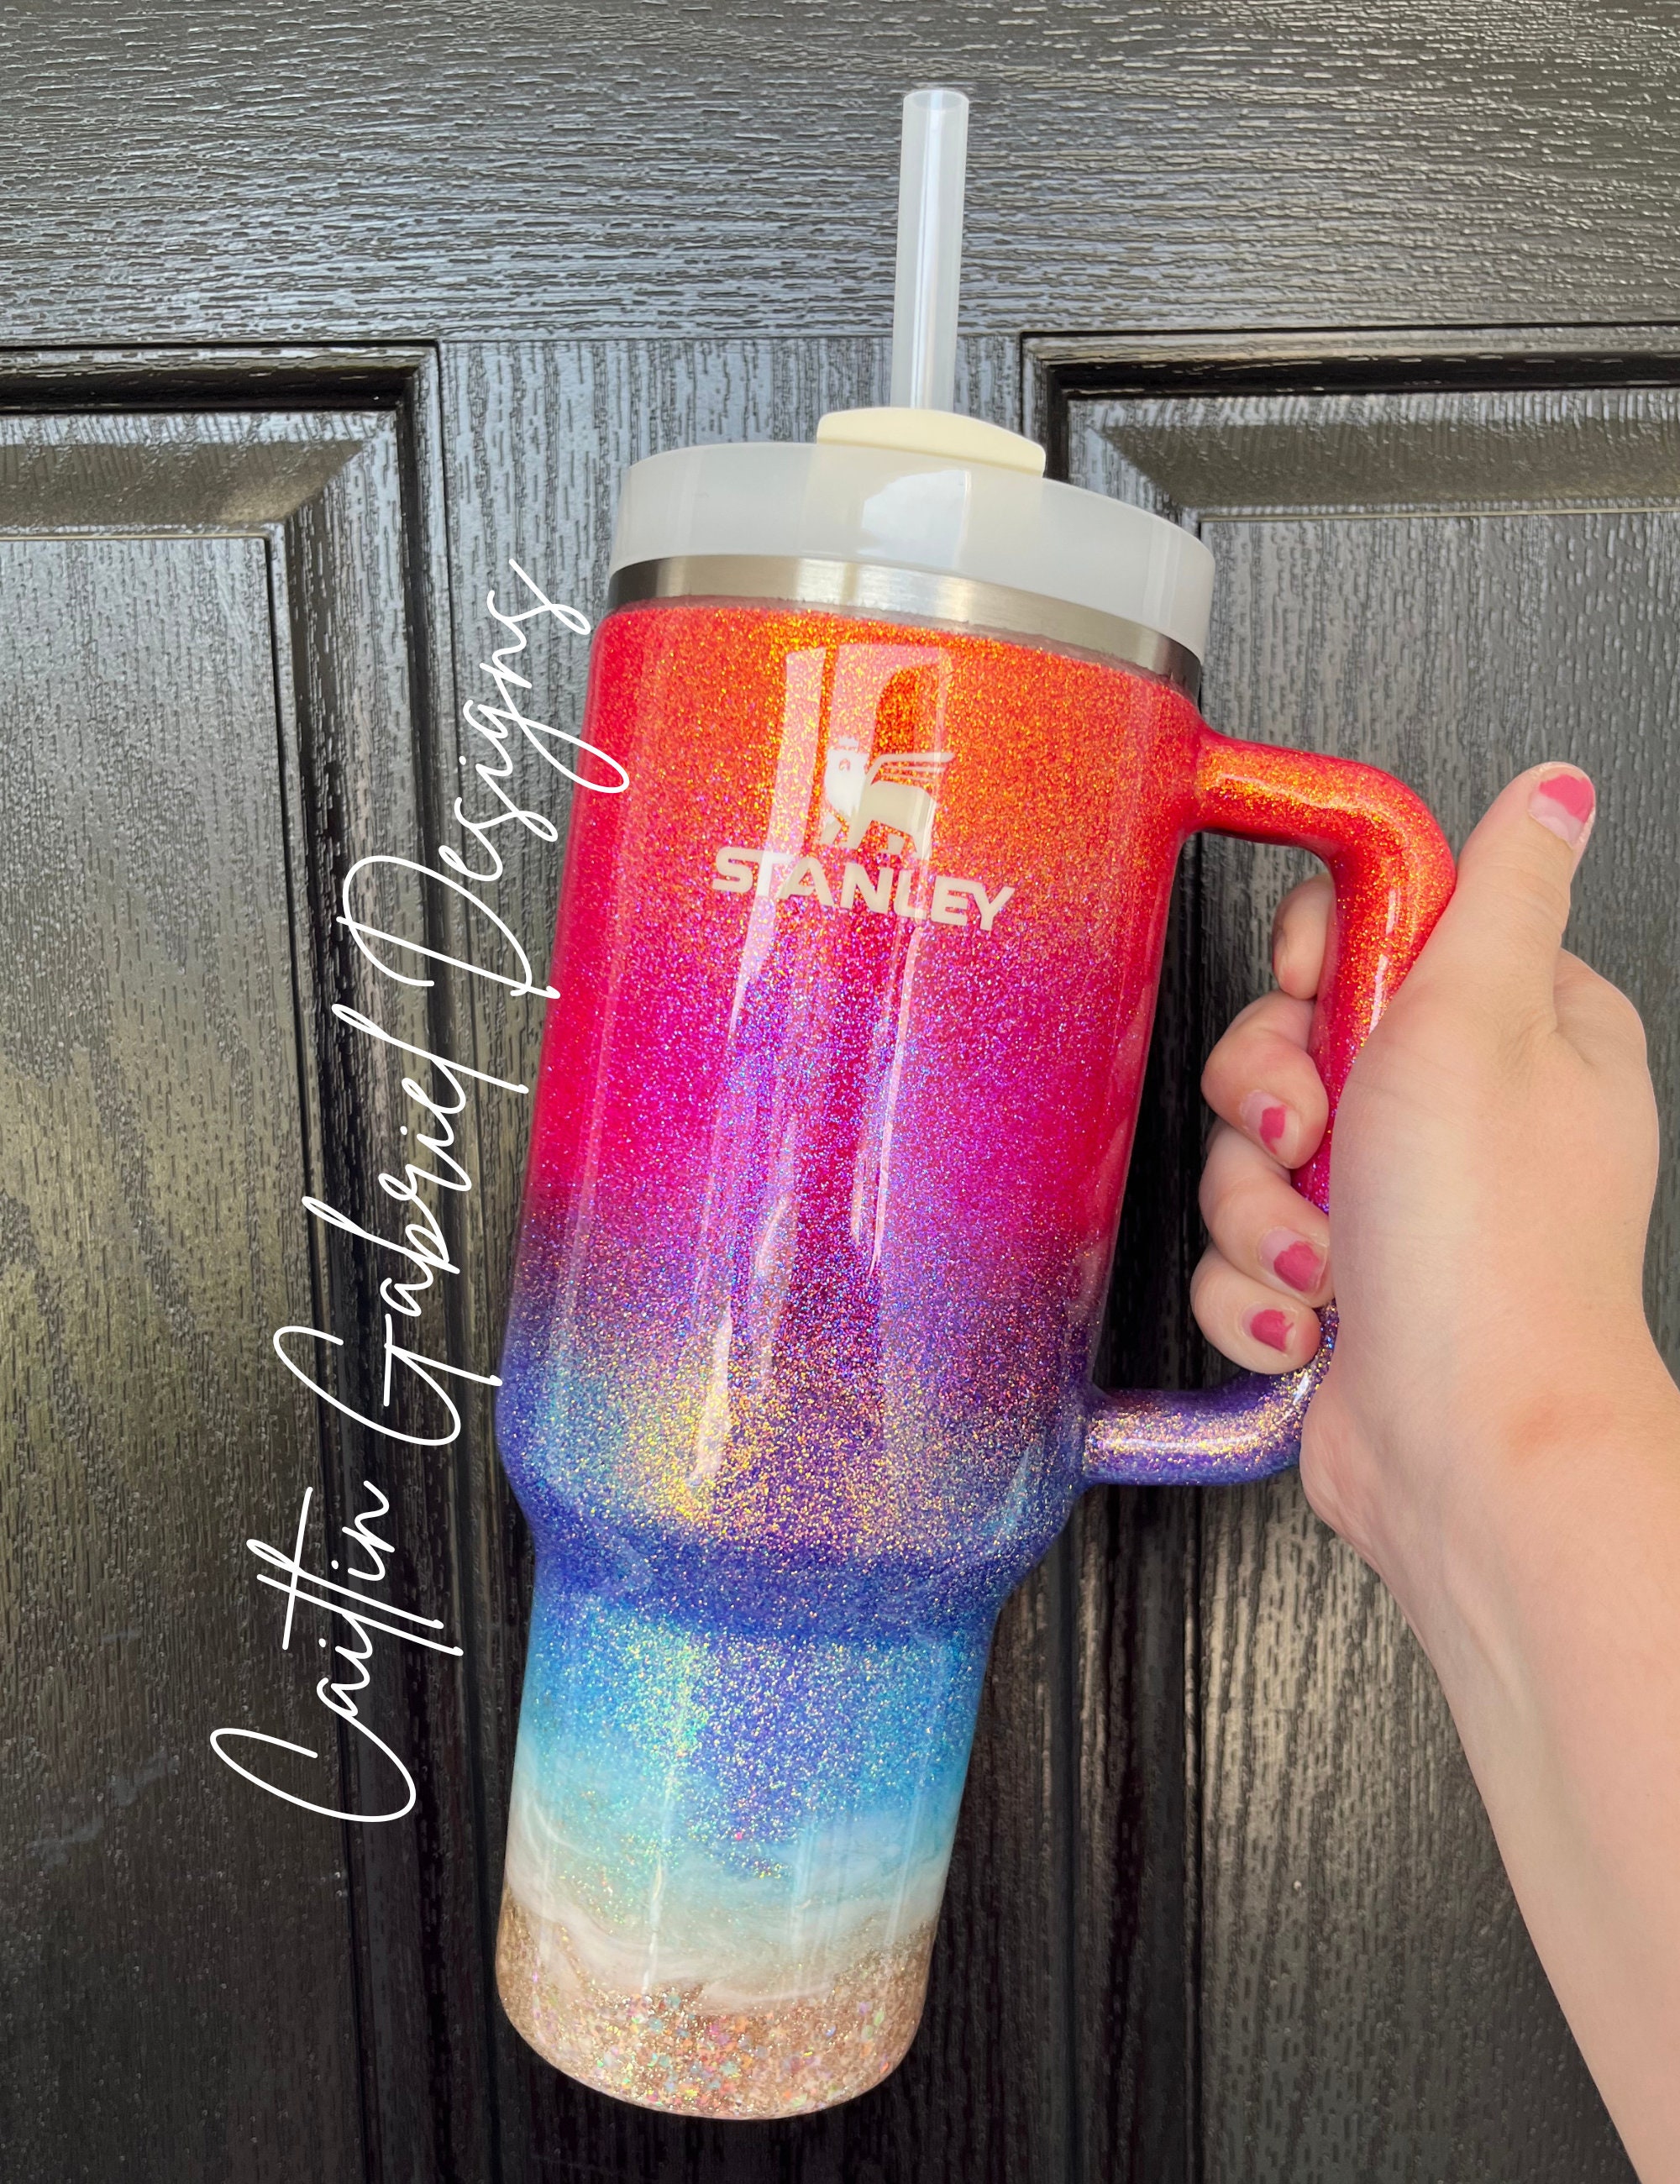 Simple Modern 30 fl oz Insulated Stainless Steel Trek Tumbler with Straw  Lid|Raspberry Vibes